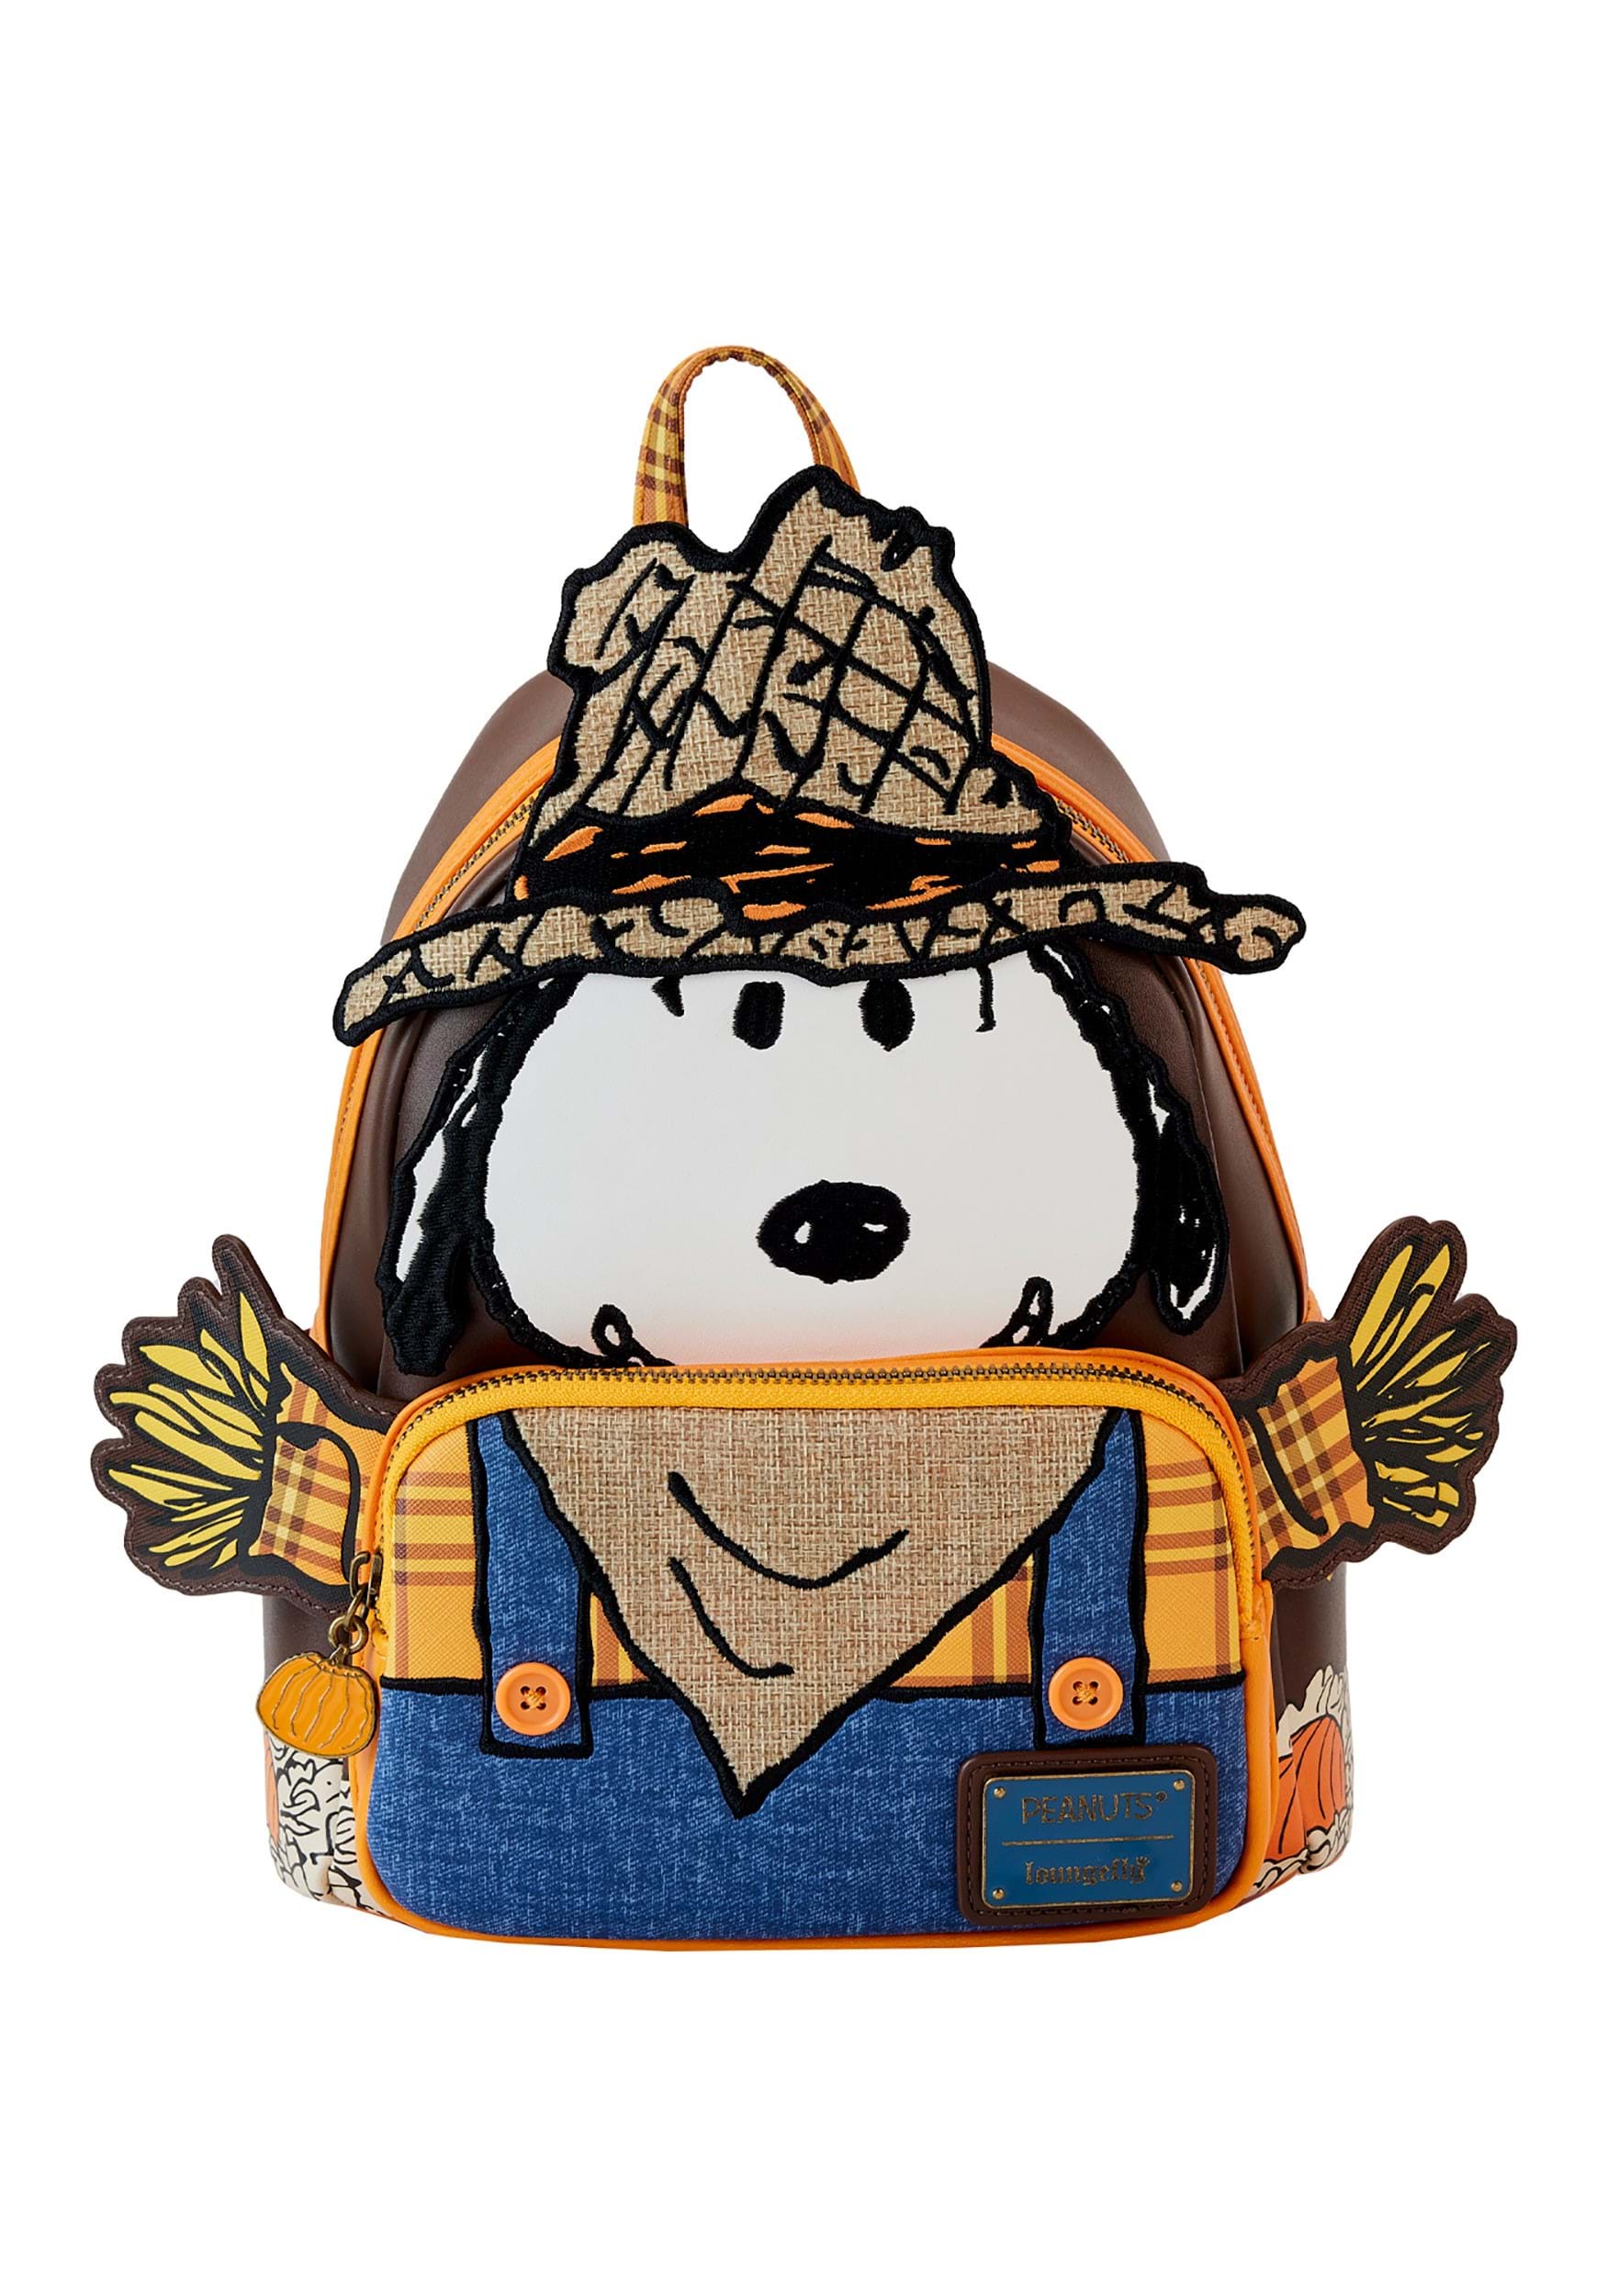 Image of Peanuts Snoopy Scarecrow Mini Backpack by Loungefly ID LFPNBK0027-ST